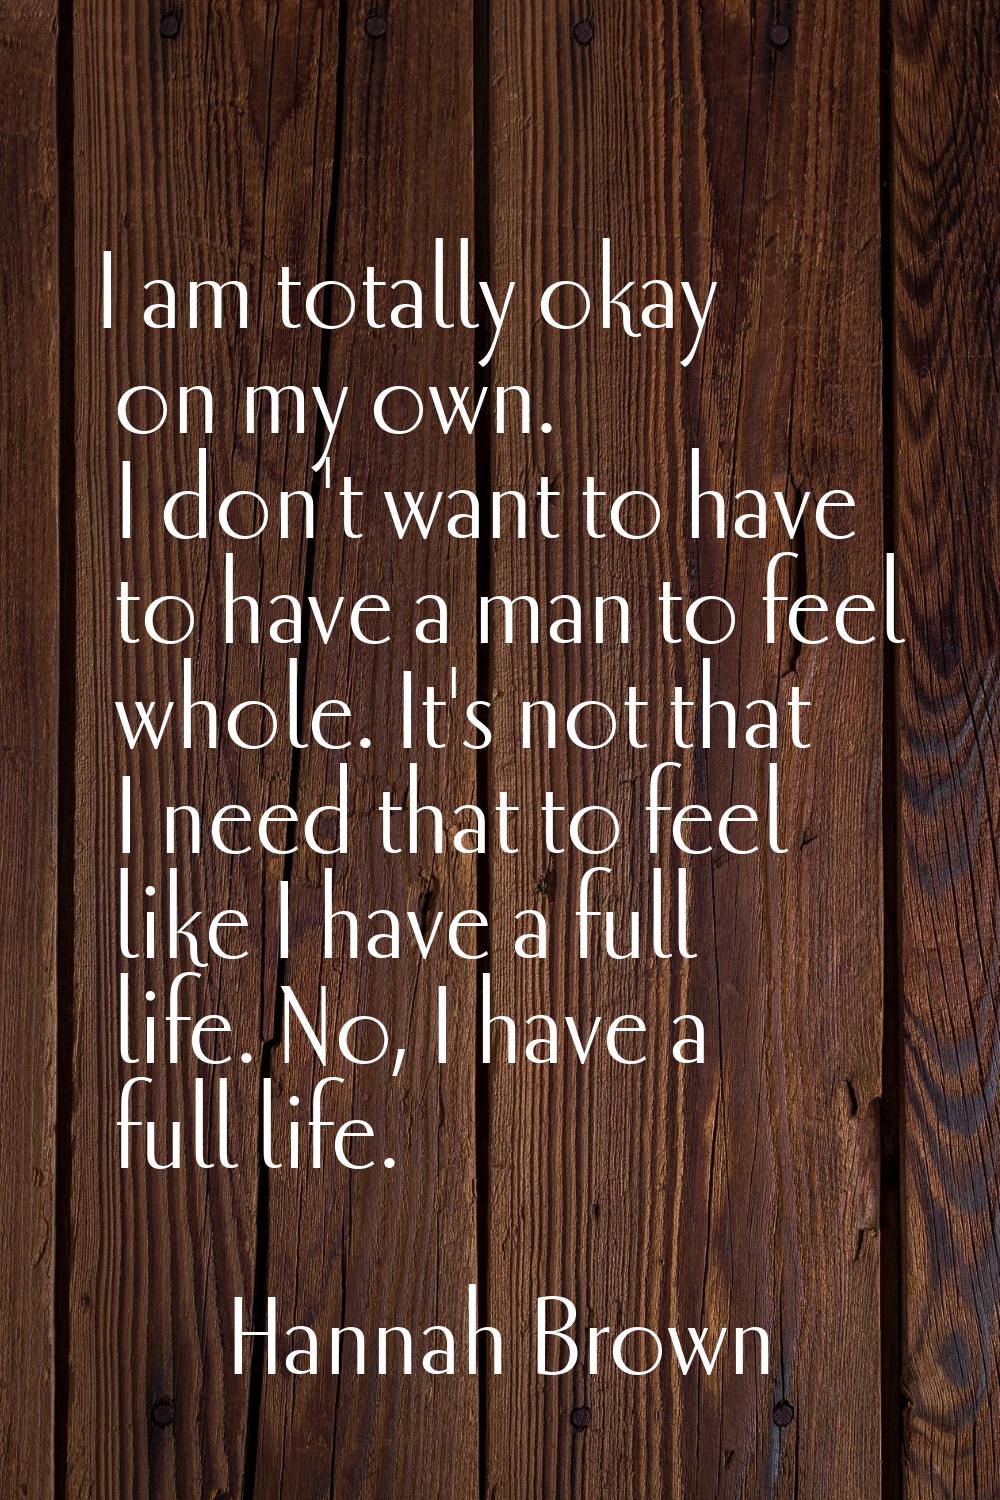 I am totally okay on my own. I don't want to have to have a man to feel whole. It's not that I need